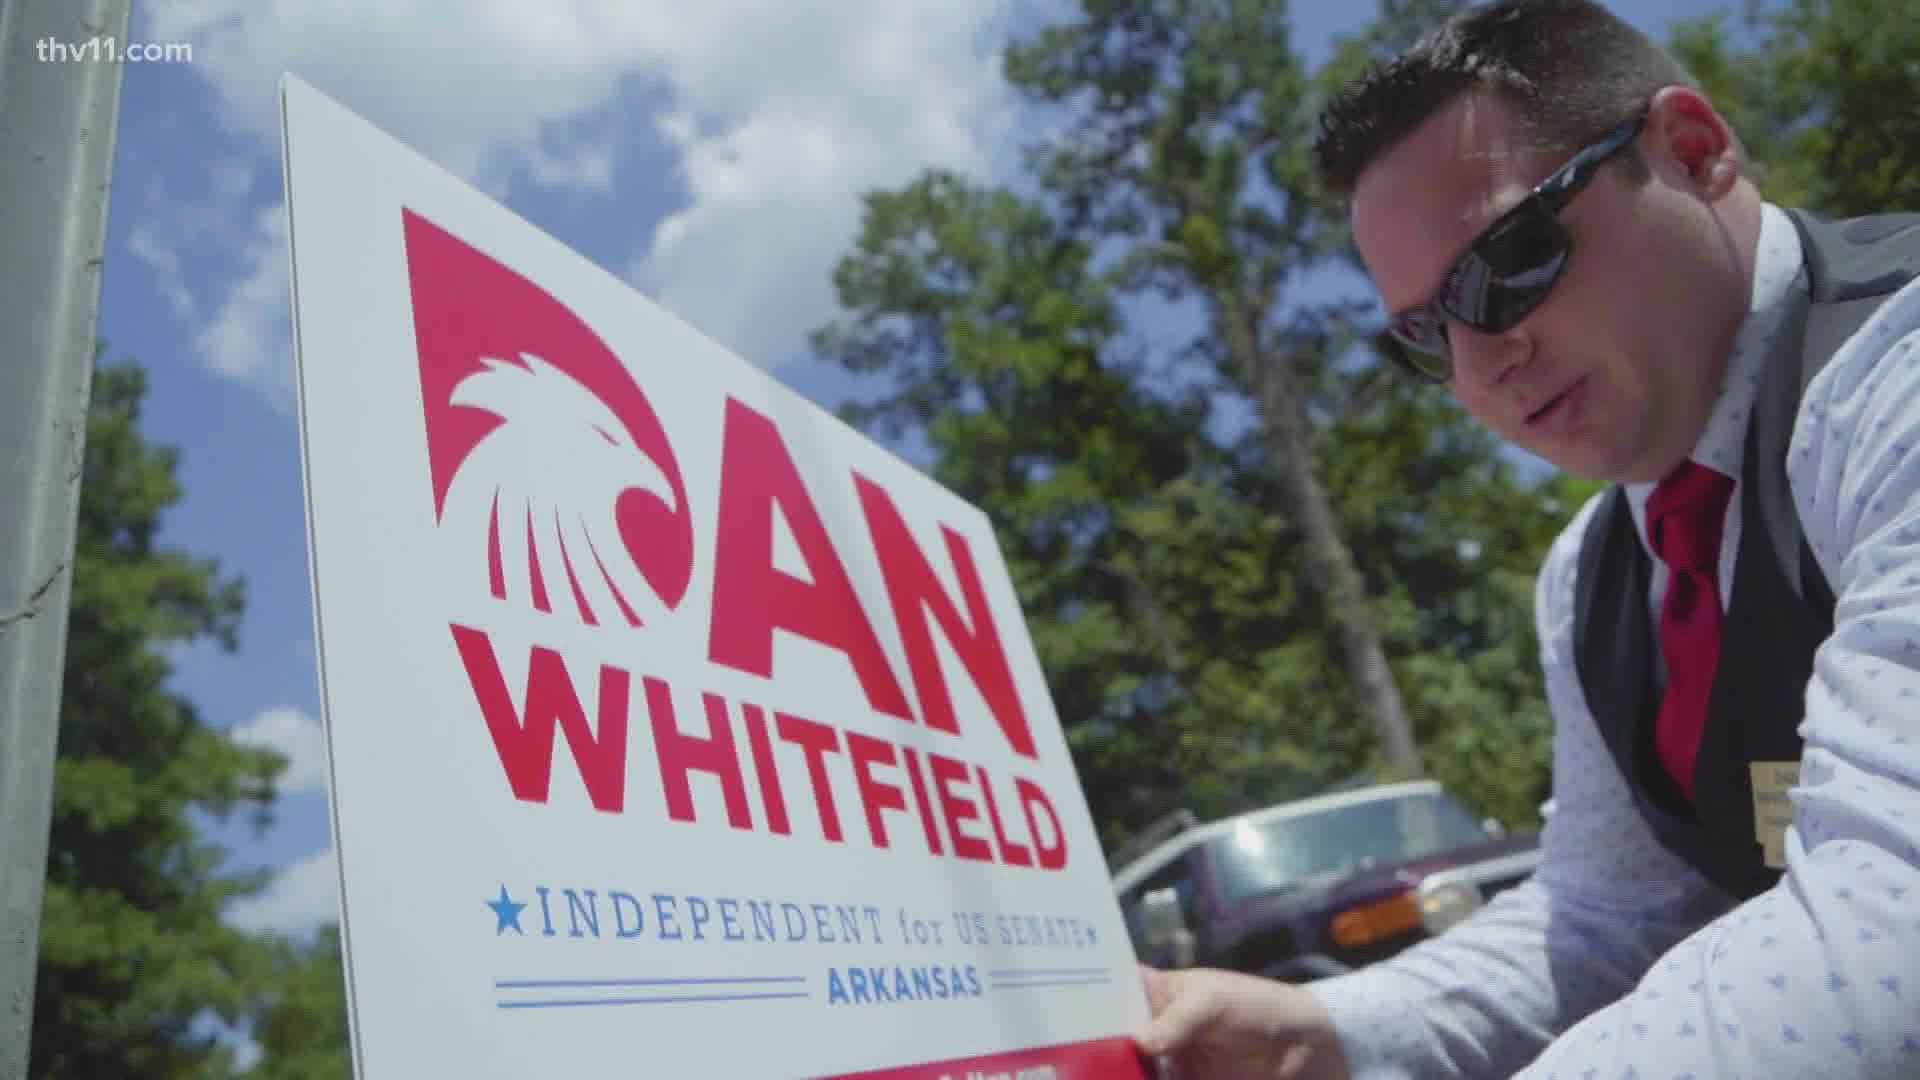 A  large number of posts from friends and supporters of Dan Whitfield are coming in. Whitfield is an independent candidate opposing Senator Tom Cotton.